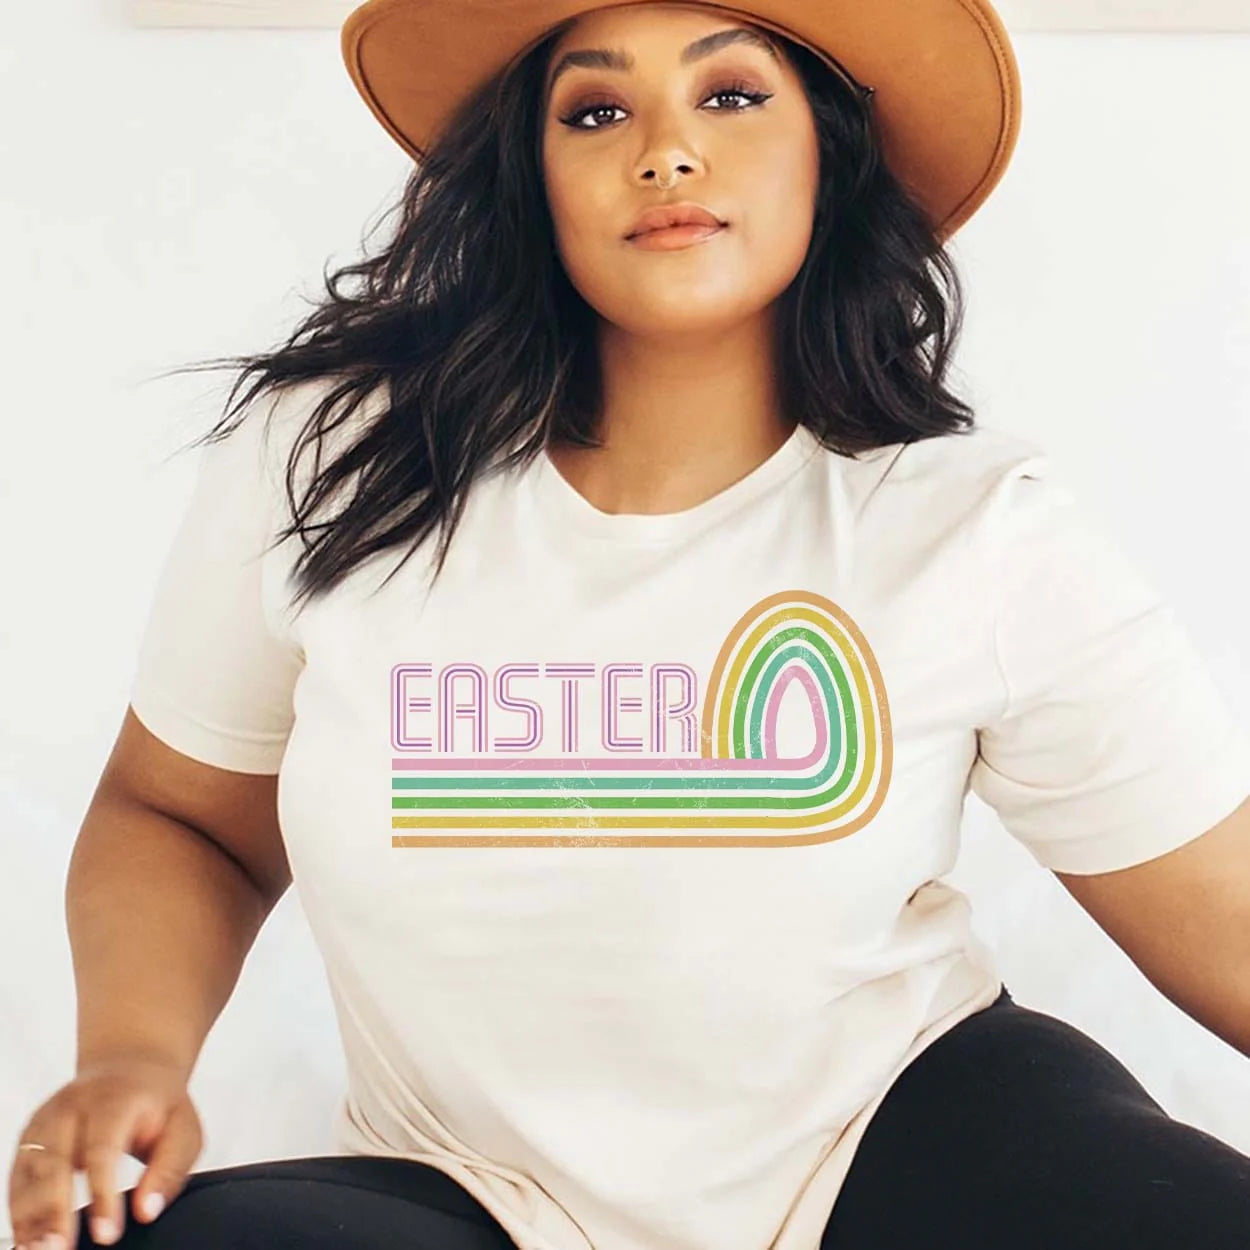 A cream colored short sleeve tee with the word "Easter" in pink neon letters with a rainbow below it that folds into the shape of an egg on the right. Item is pictured on a plain white background